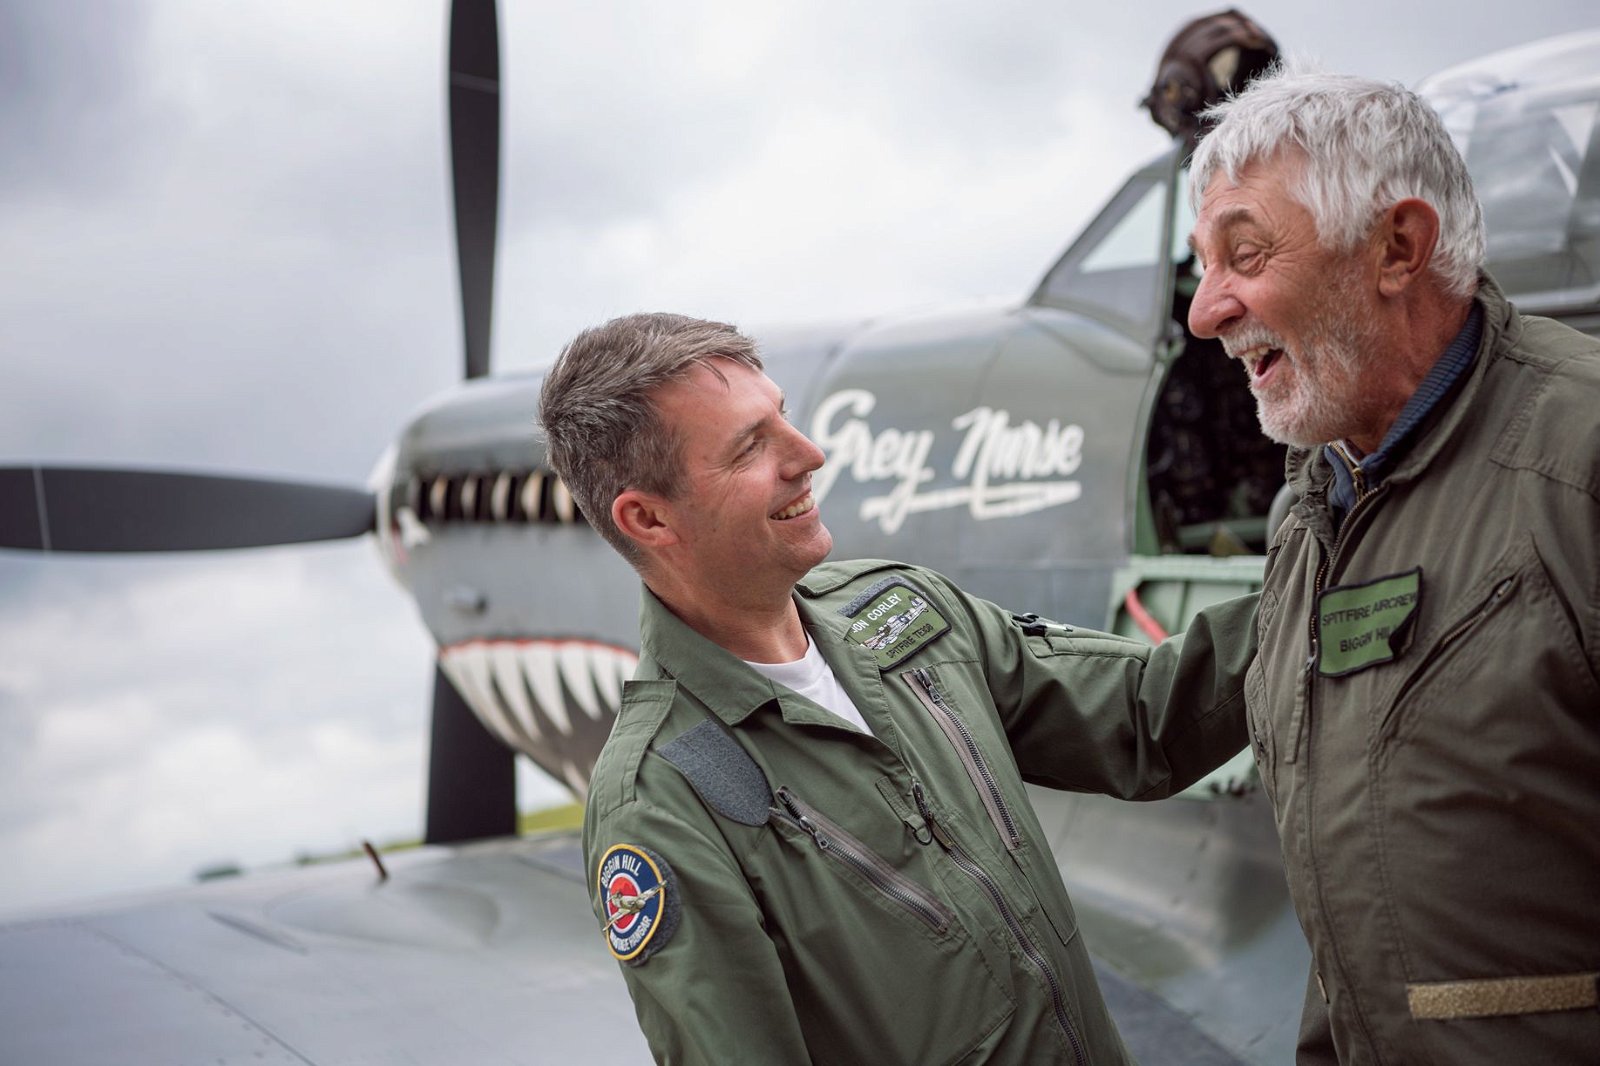 Fly a Spitfire Becomes World's Largest Spitfire Flight Operator With Help of BookingHound